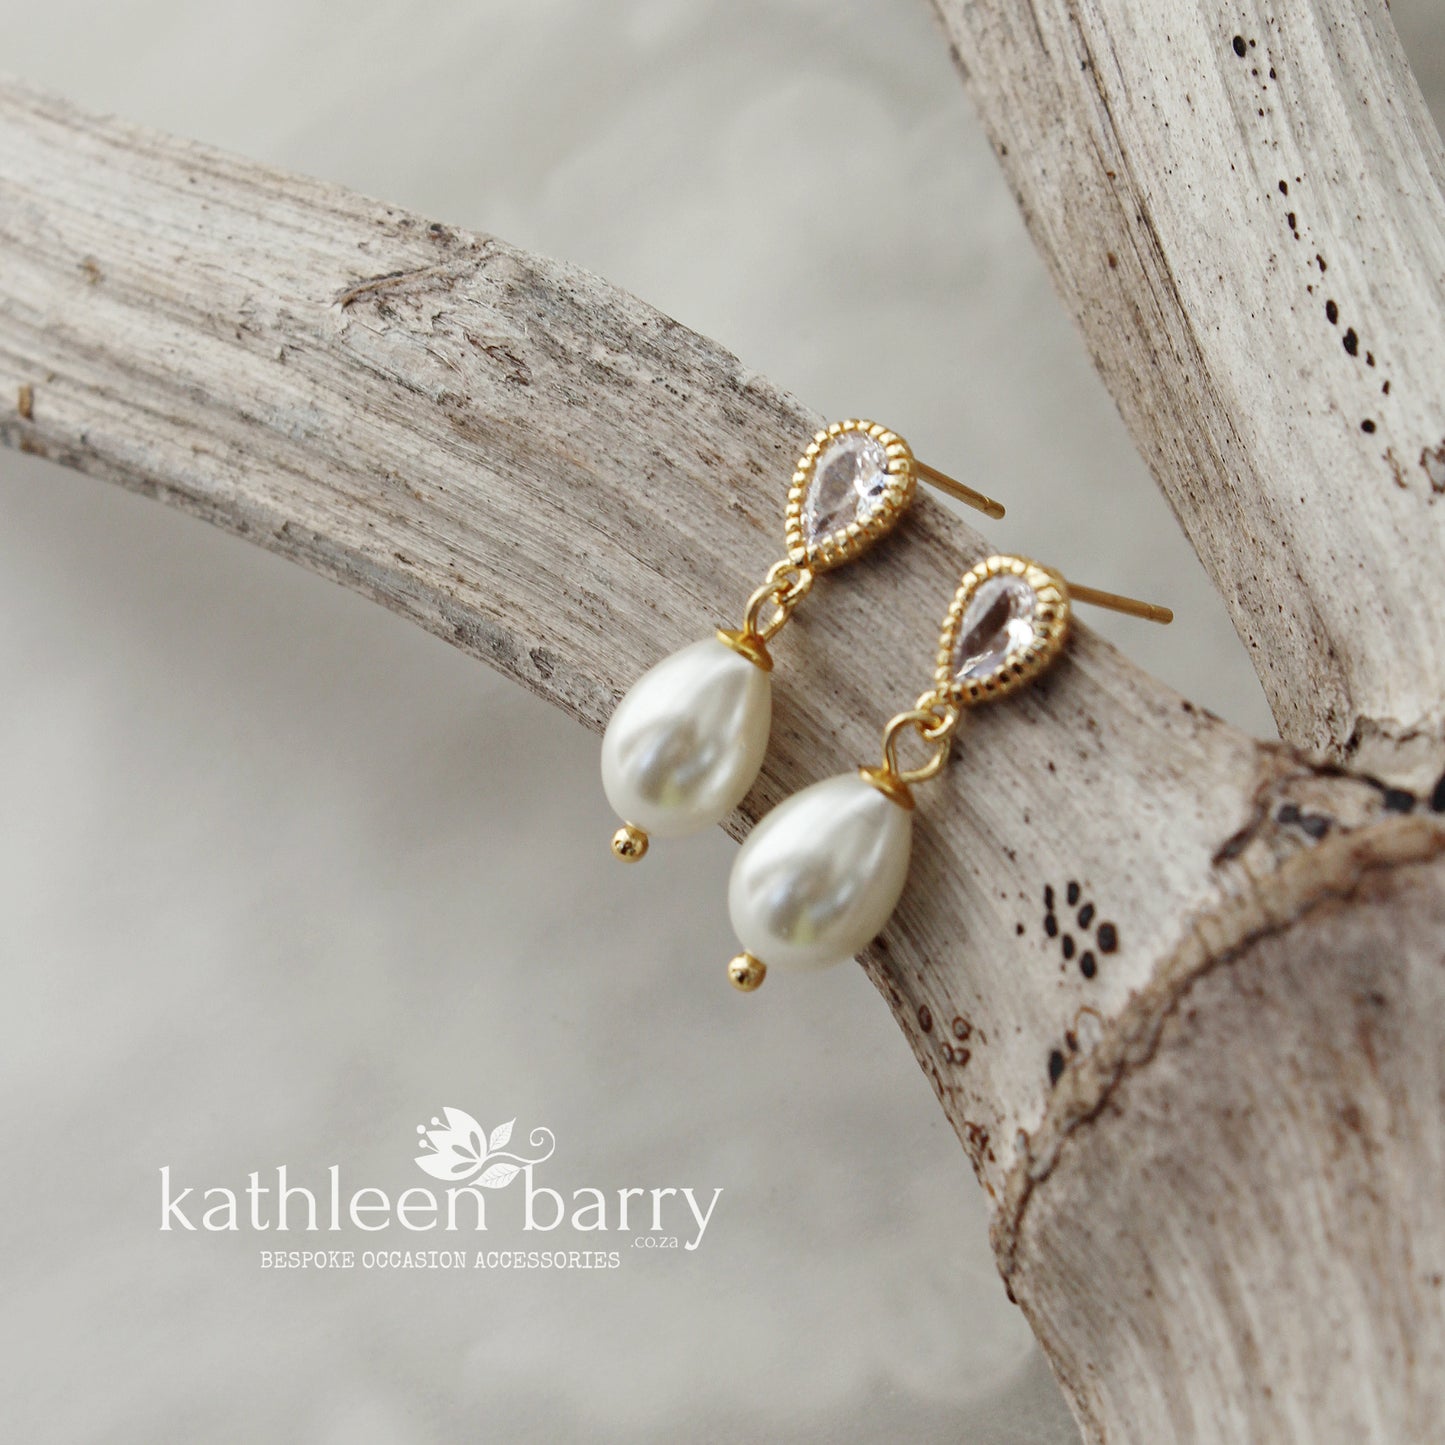 Dainty pearl drop cubic zirconia stud earrings available in Gold finish only (limited stock available)